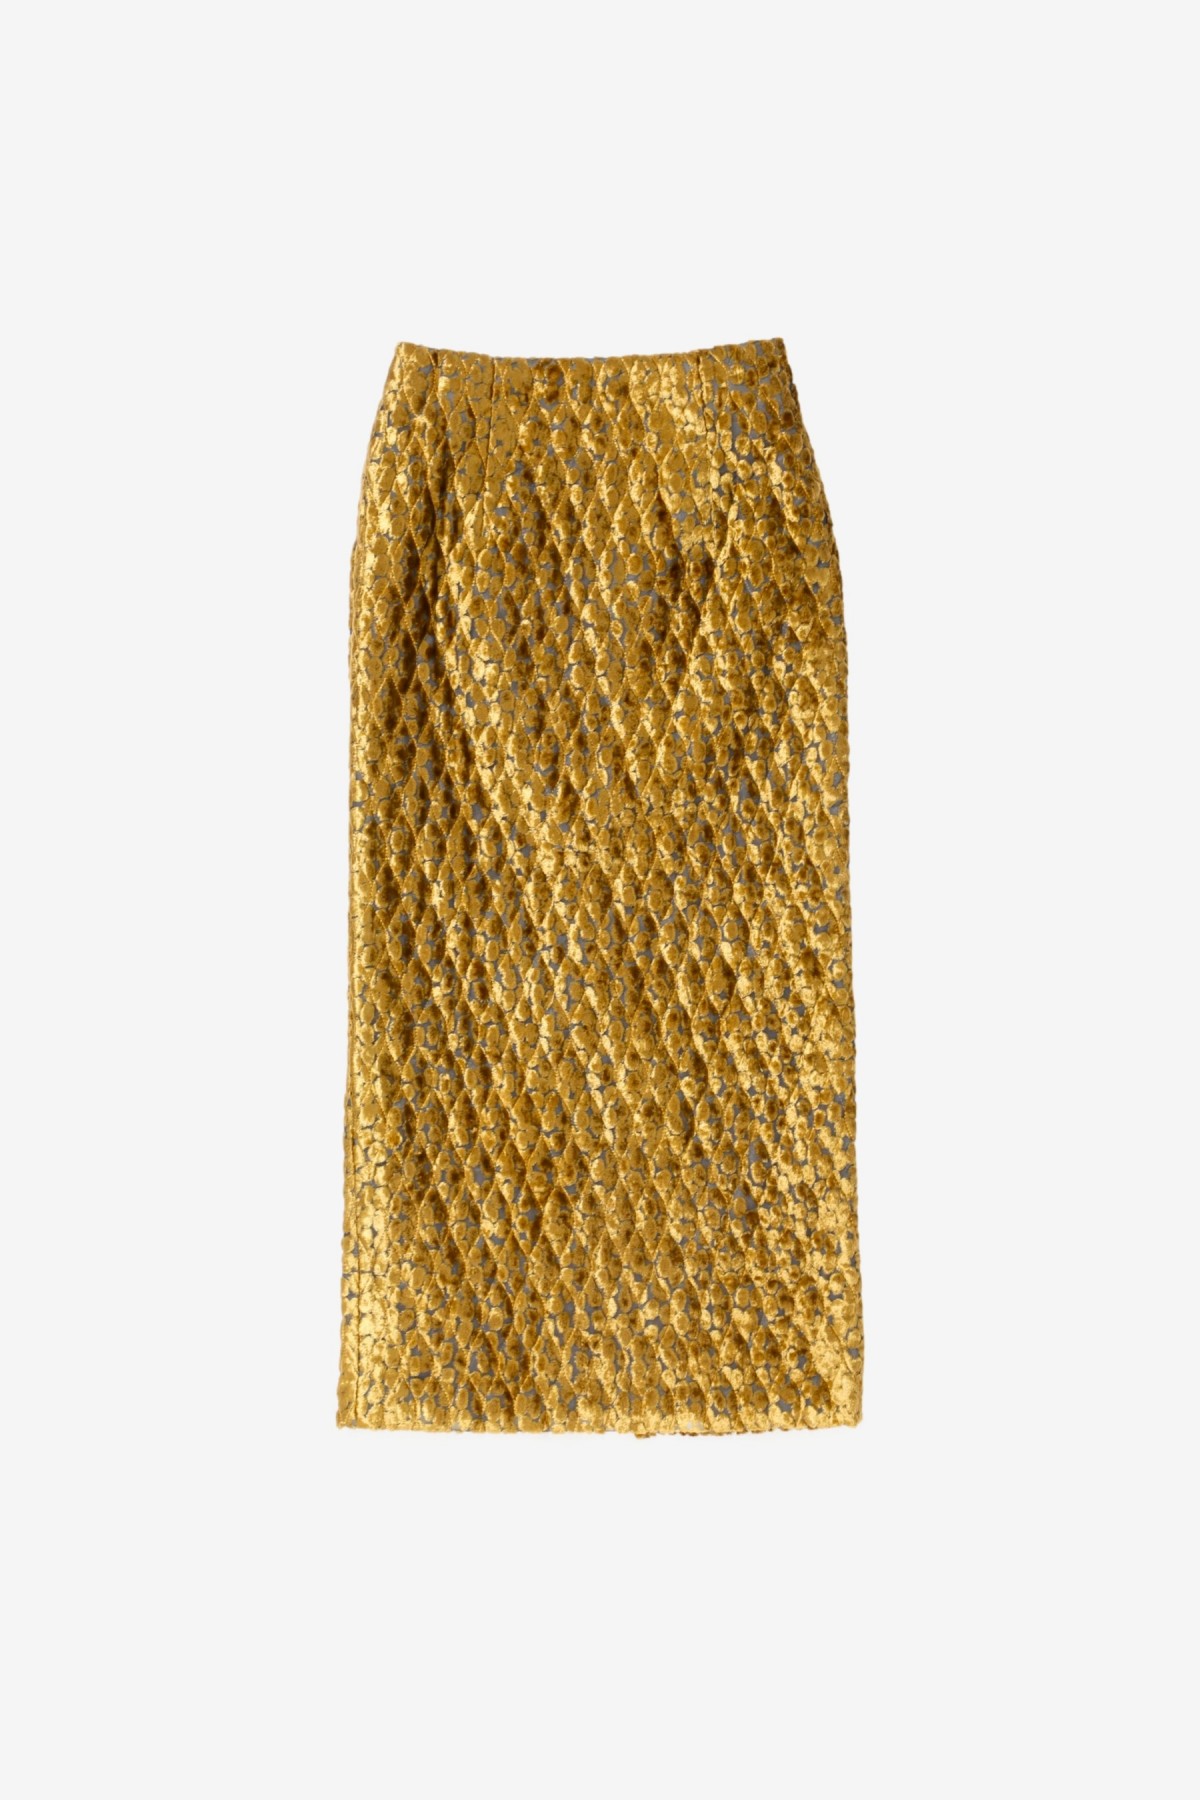 Needles Pencil Skirt in Yellow Gold